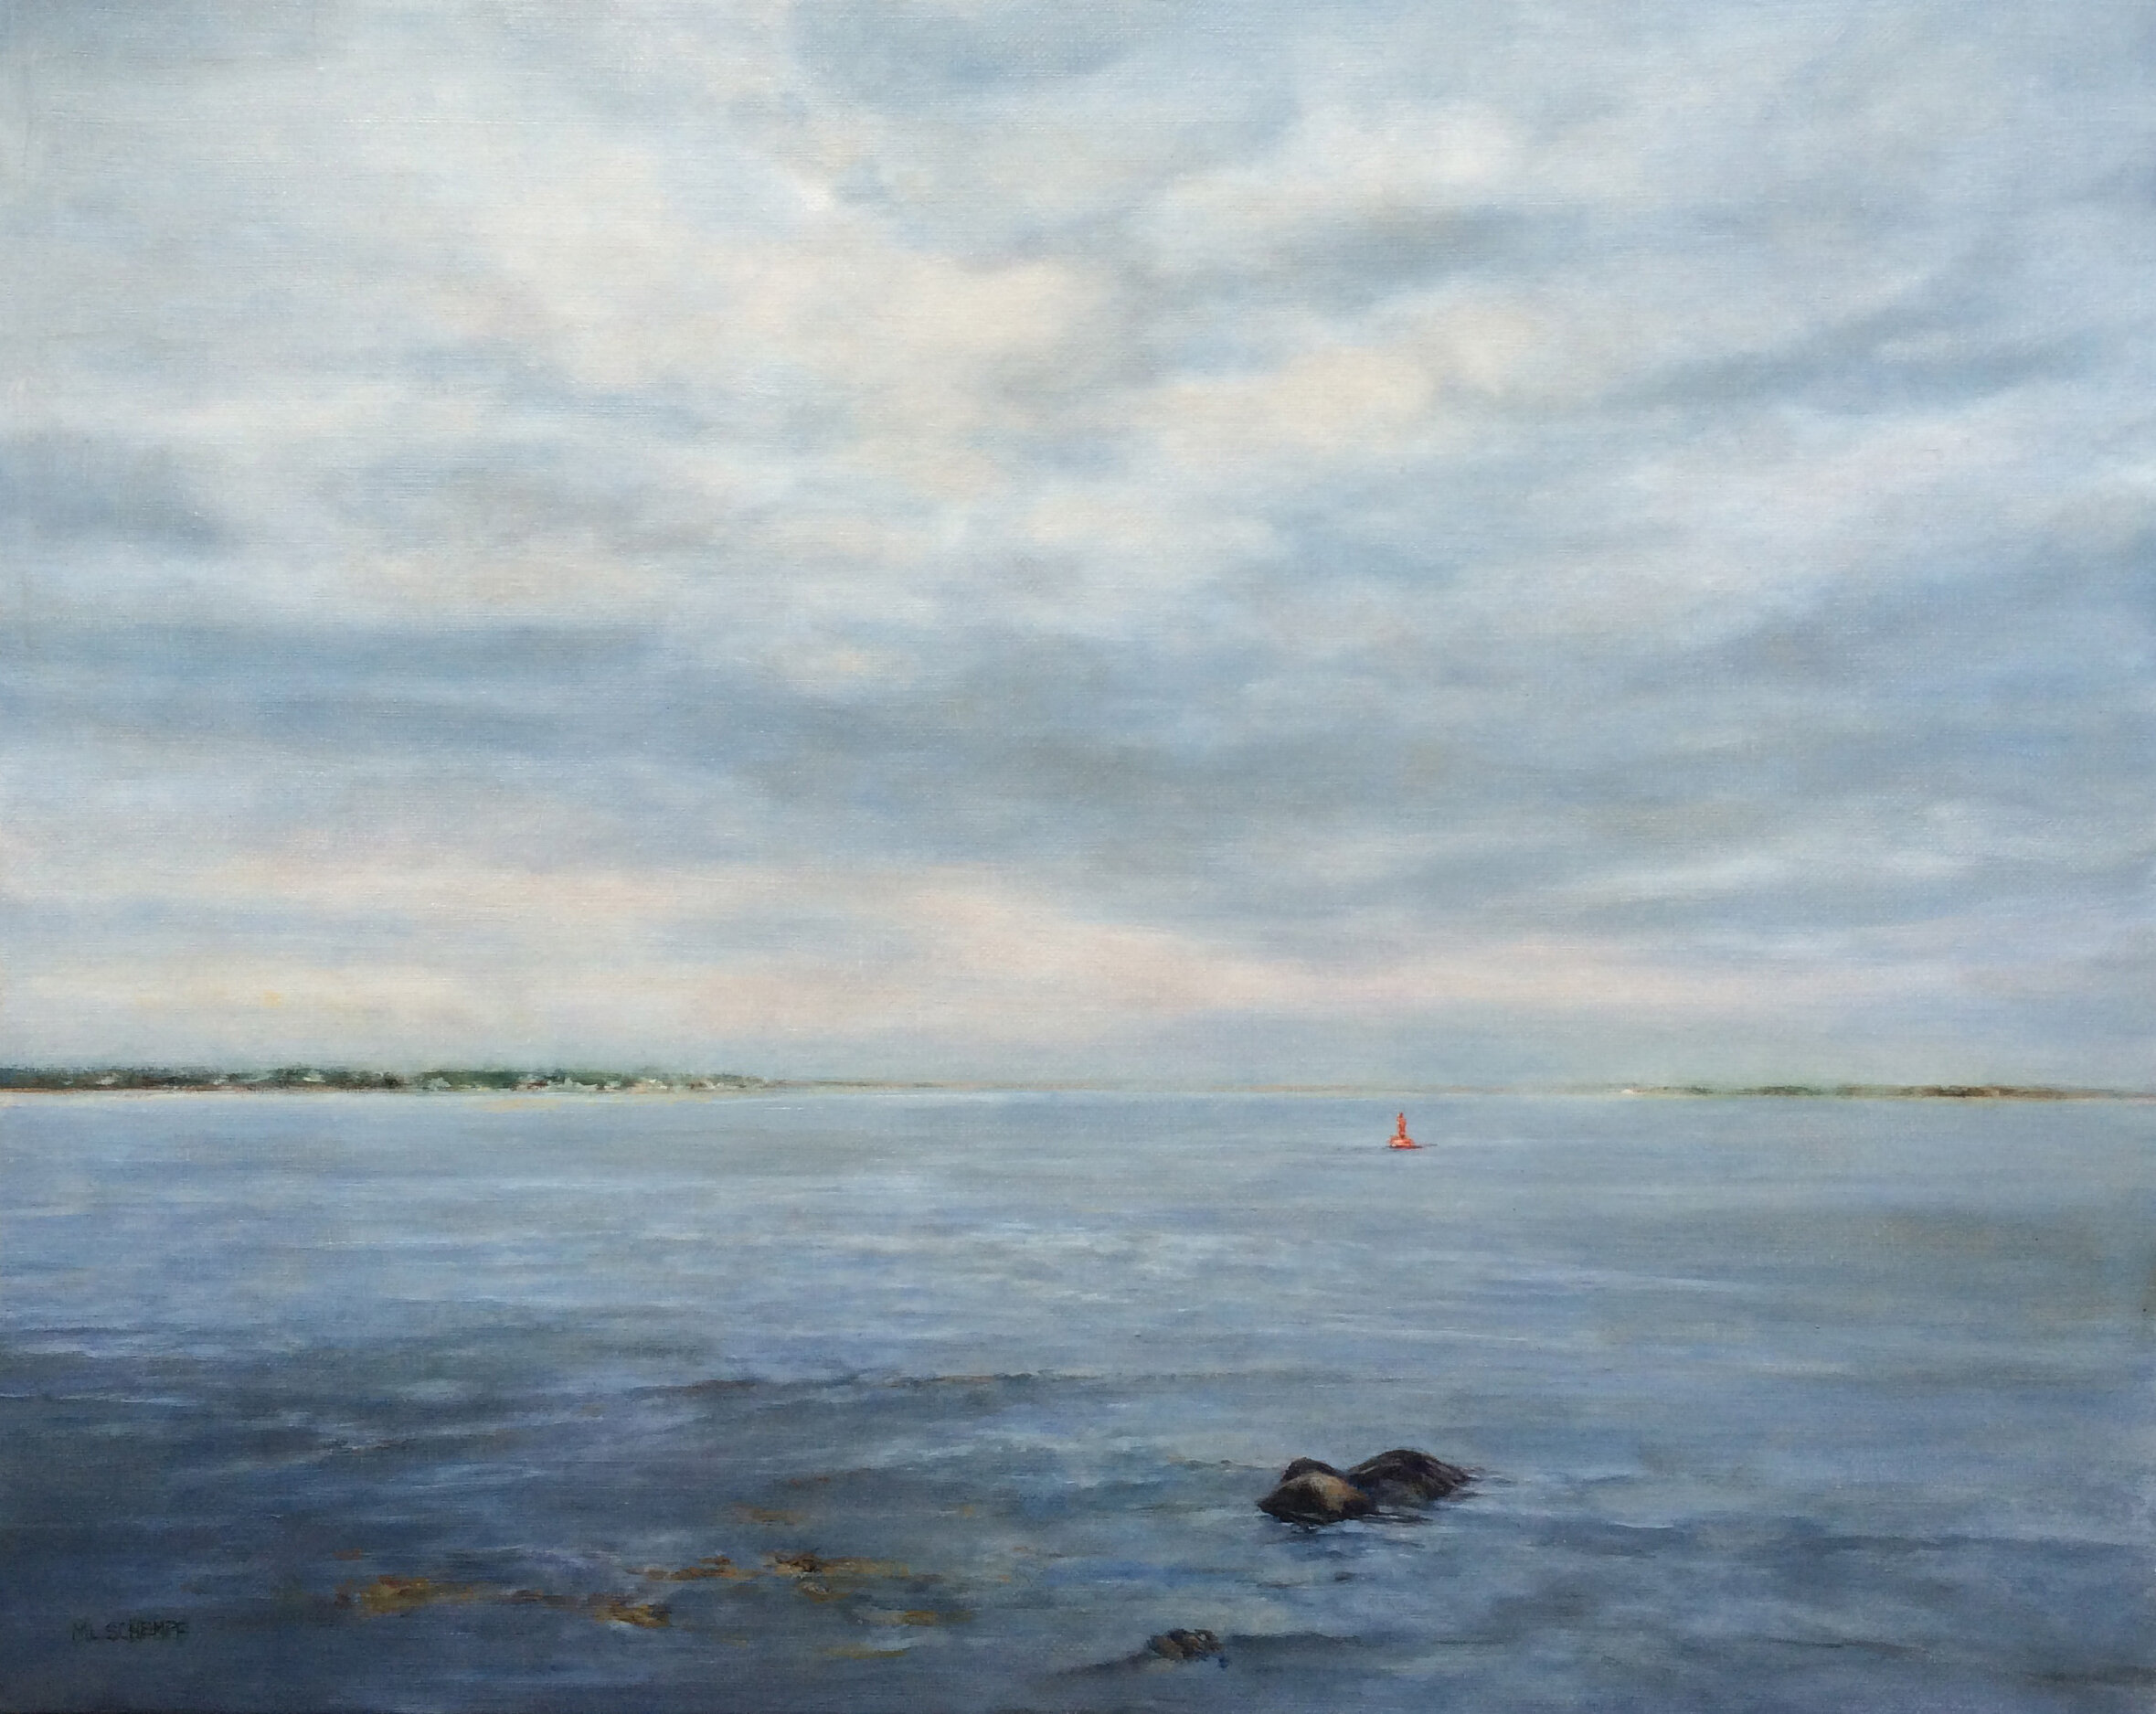  Mary Lou Schempf  View from Stonington,  16” x 20”, oil on linen  (private collection)  